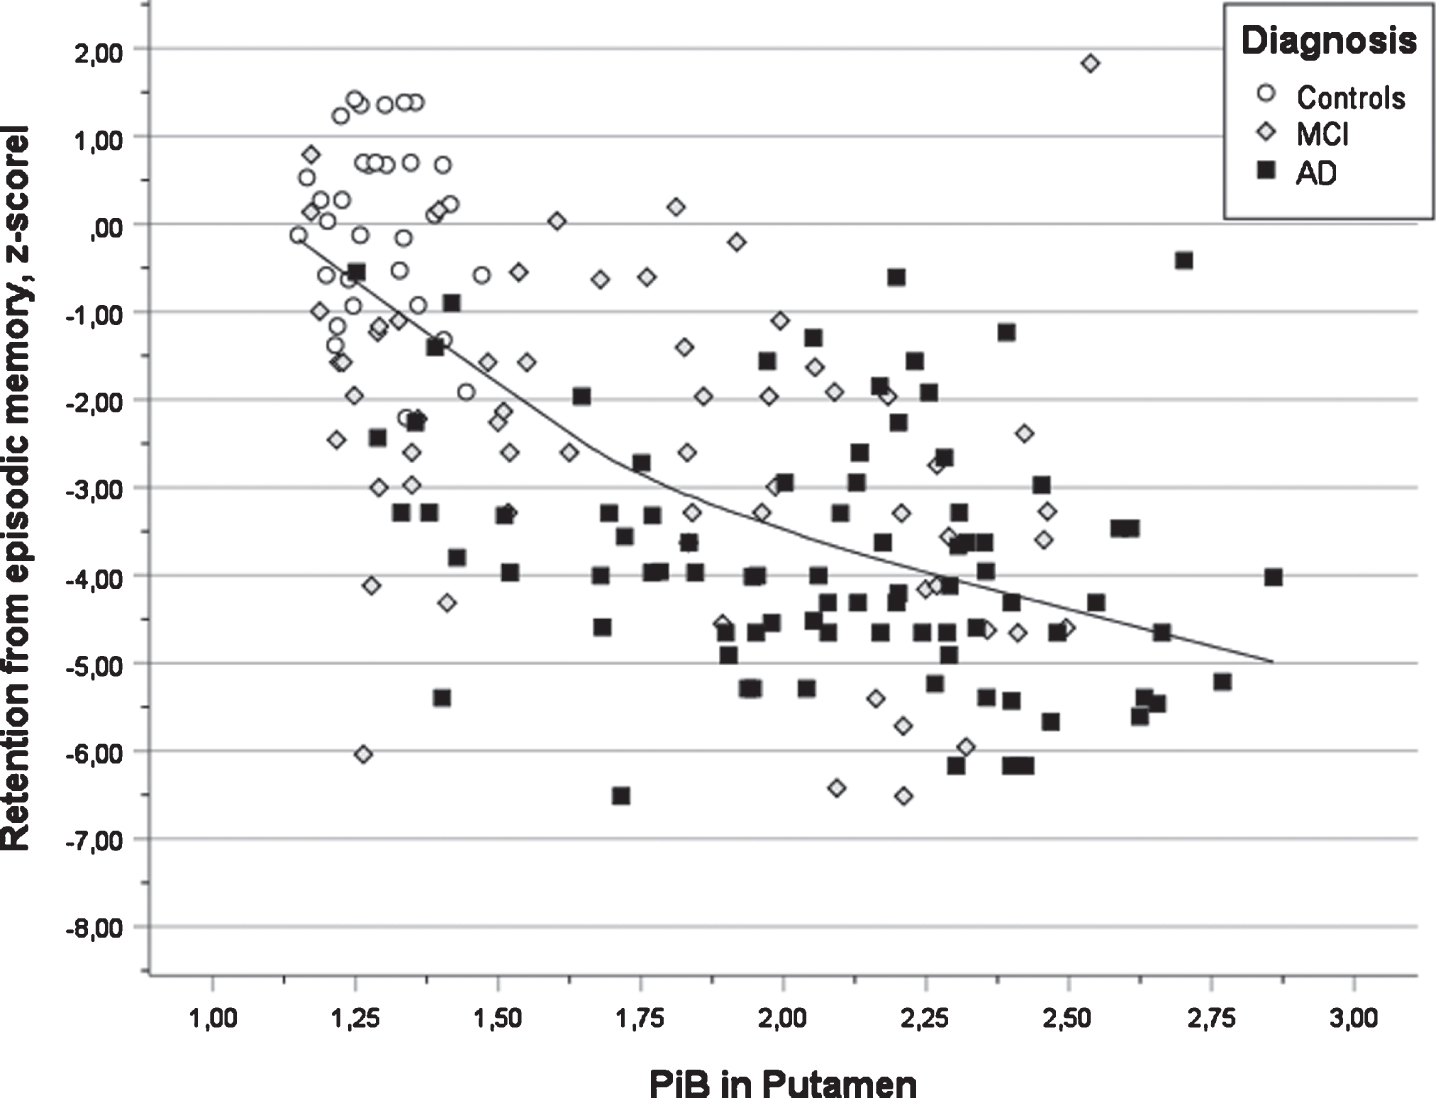 Scatter plot of test results in verbal learning versus PIB value in putamen for three diagnostic groups (AD, MCI, and Controls) also showing the regression line using local weighted regression.